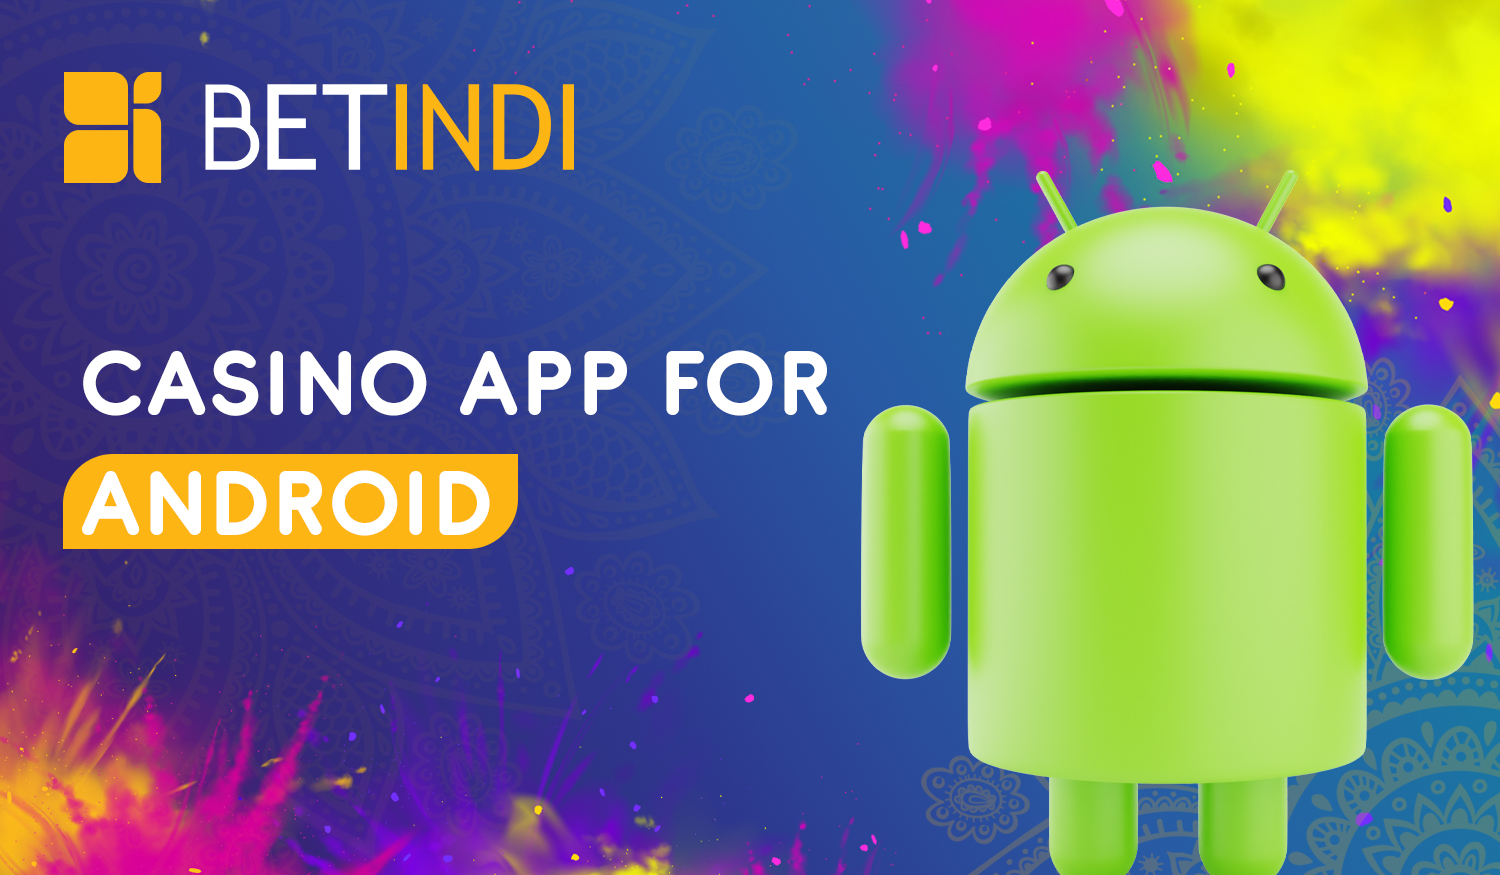 How to download and install the Betindi mobile app on your Android device